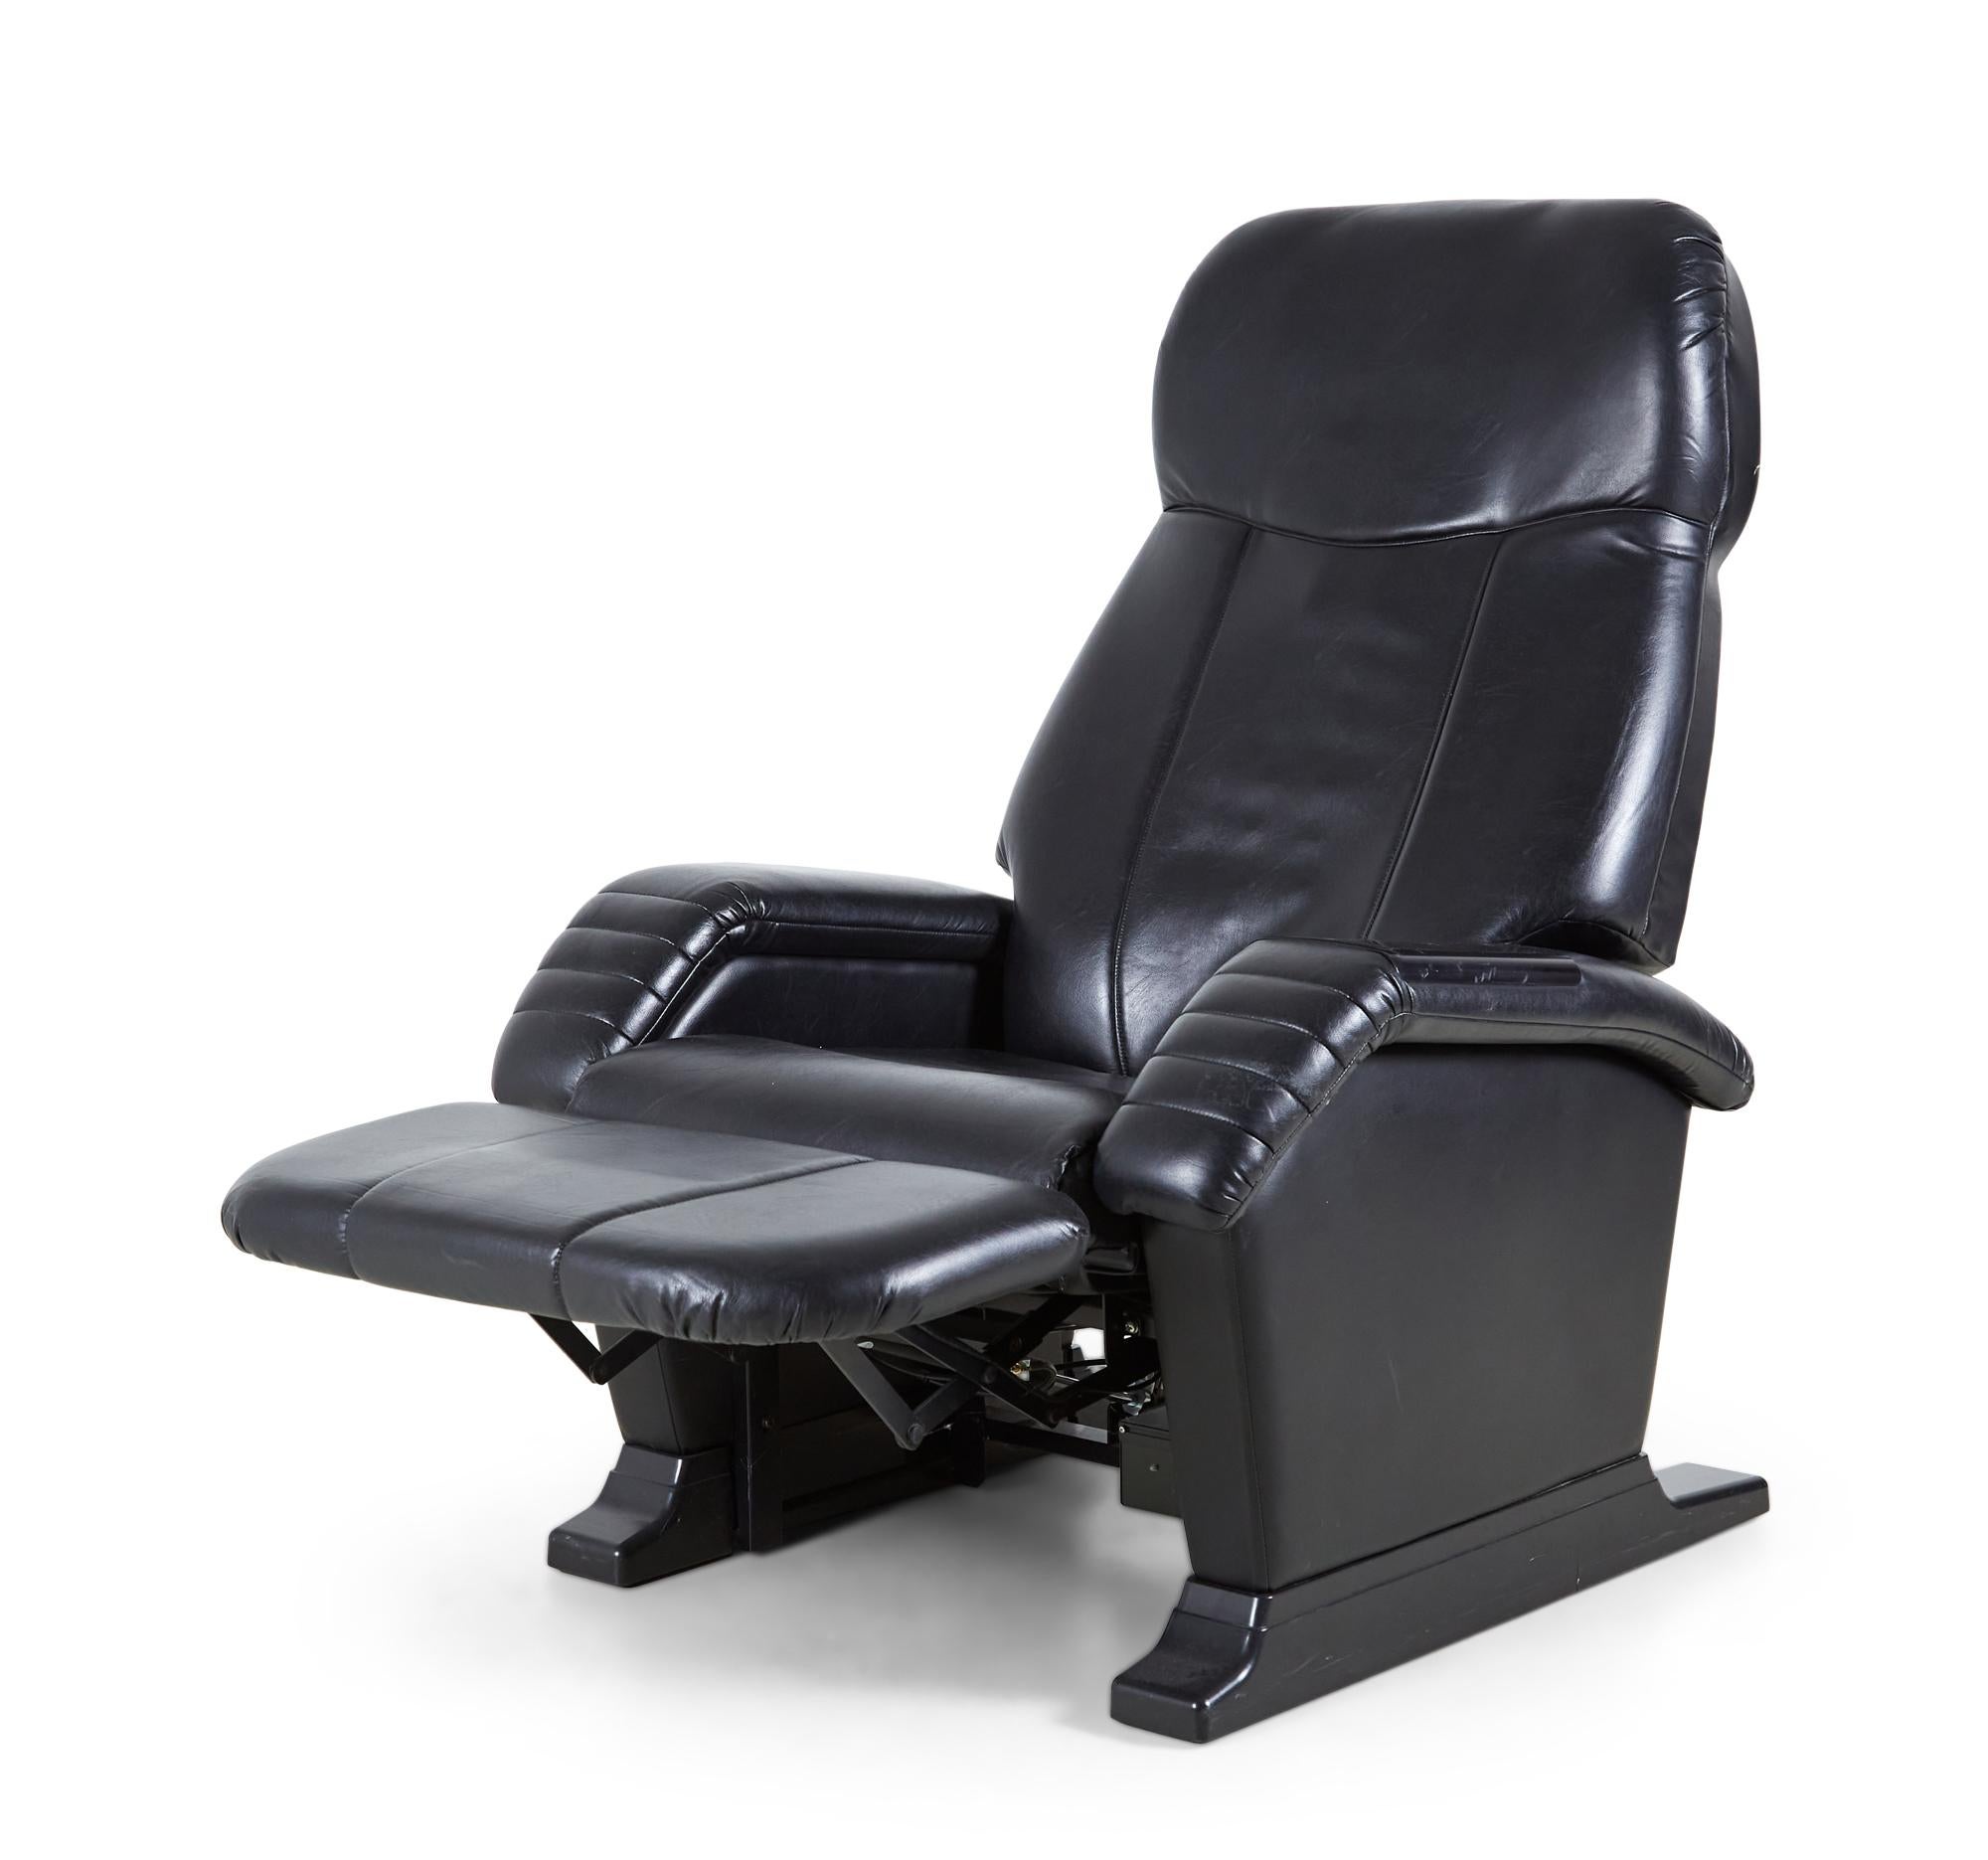 American Contemporary Black Leather Massage Chair 3